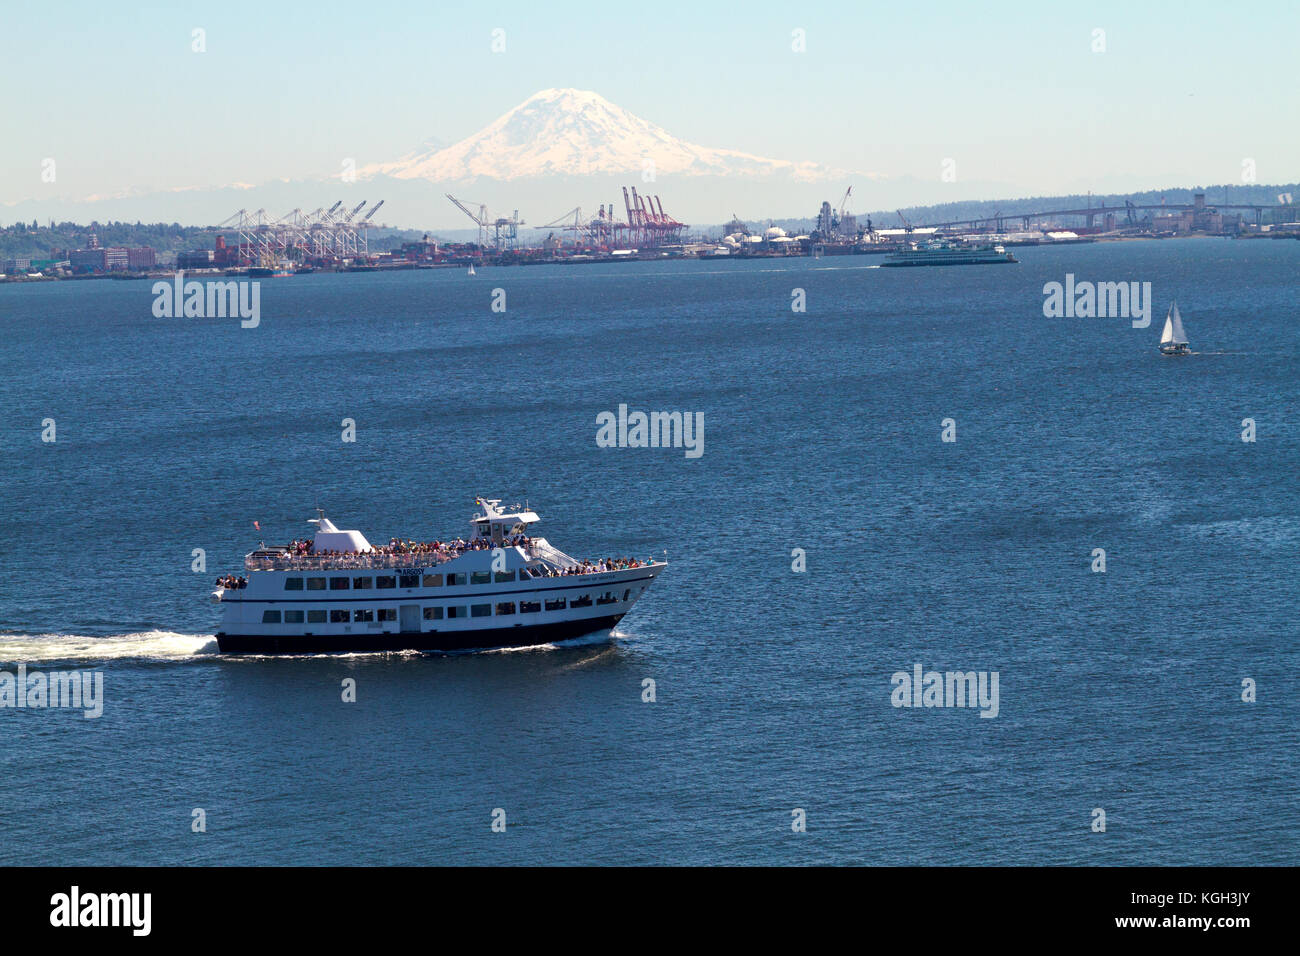 A tour-boat crowded with sightseers in Seattle with Mt. Rainier in the background.as seen from the deck of a cruise ship. Stock Photo